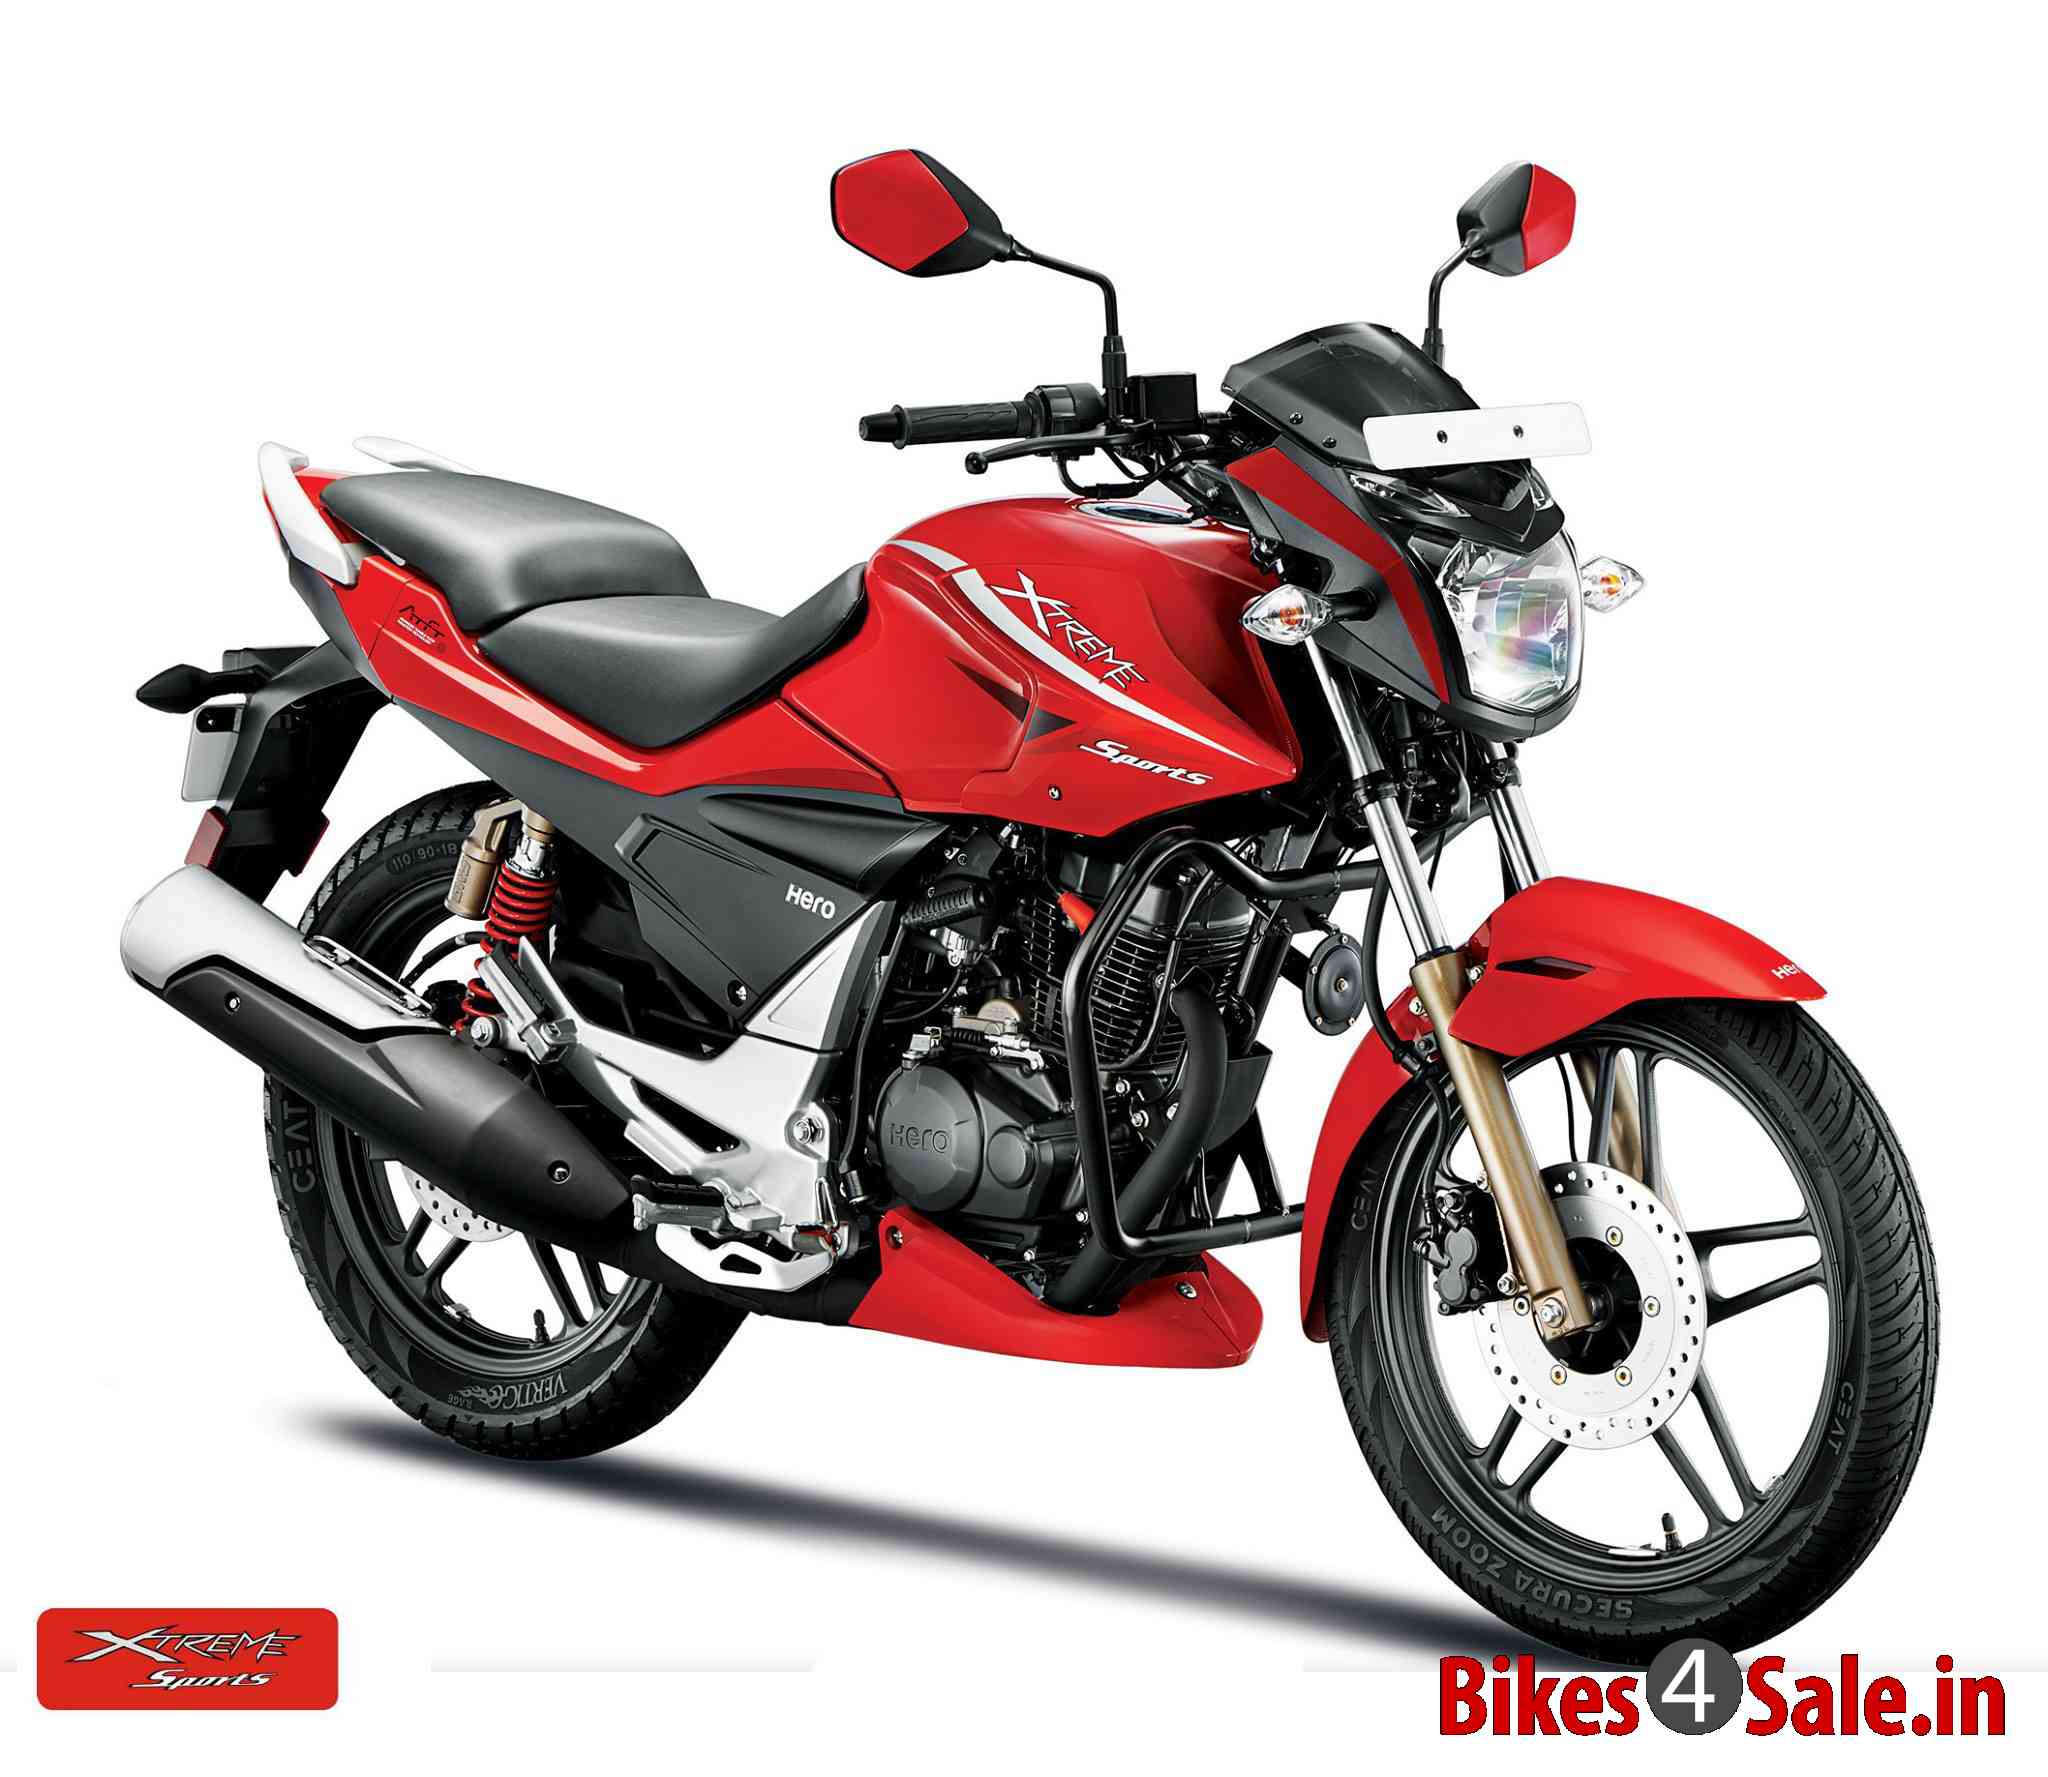 Hero Xtreme Sports Motorcycle Picture Gallery. Red Colour ...